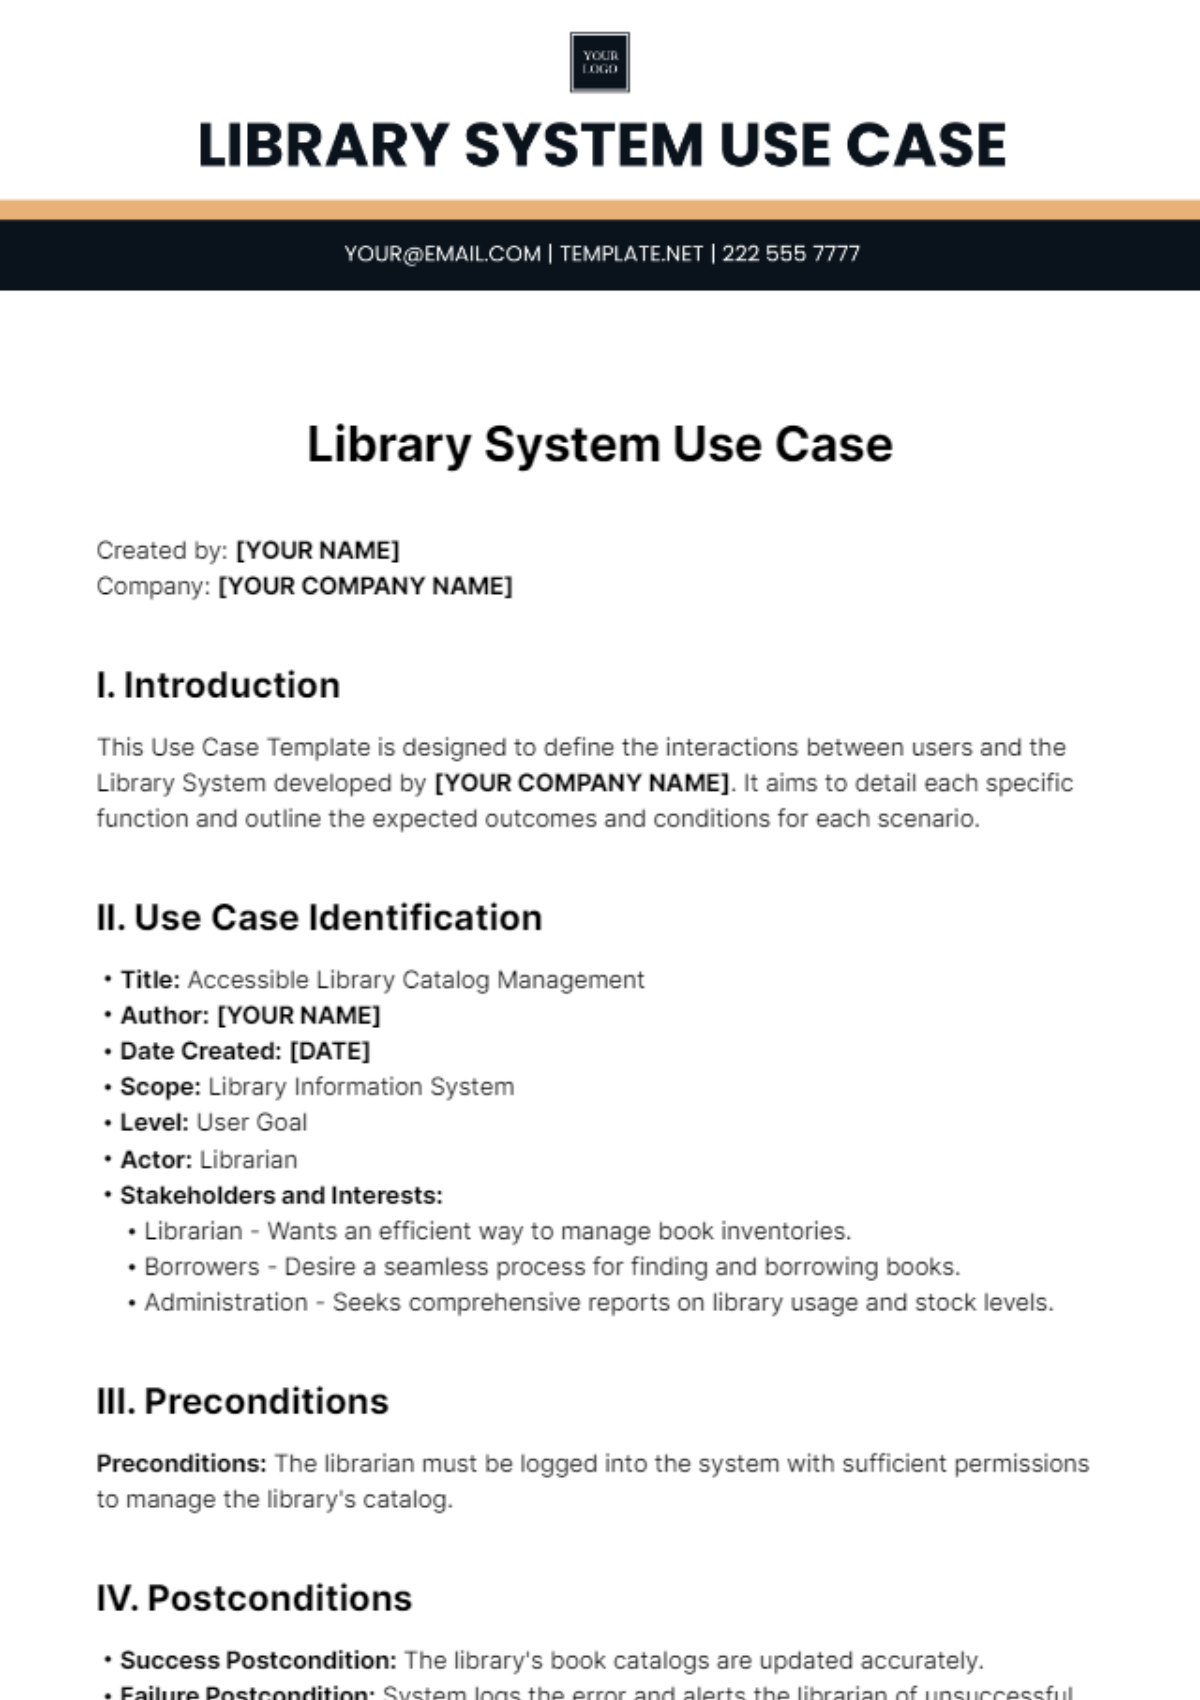 Library System Use Case Template